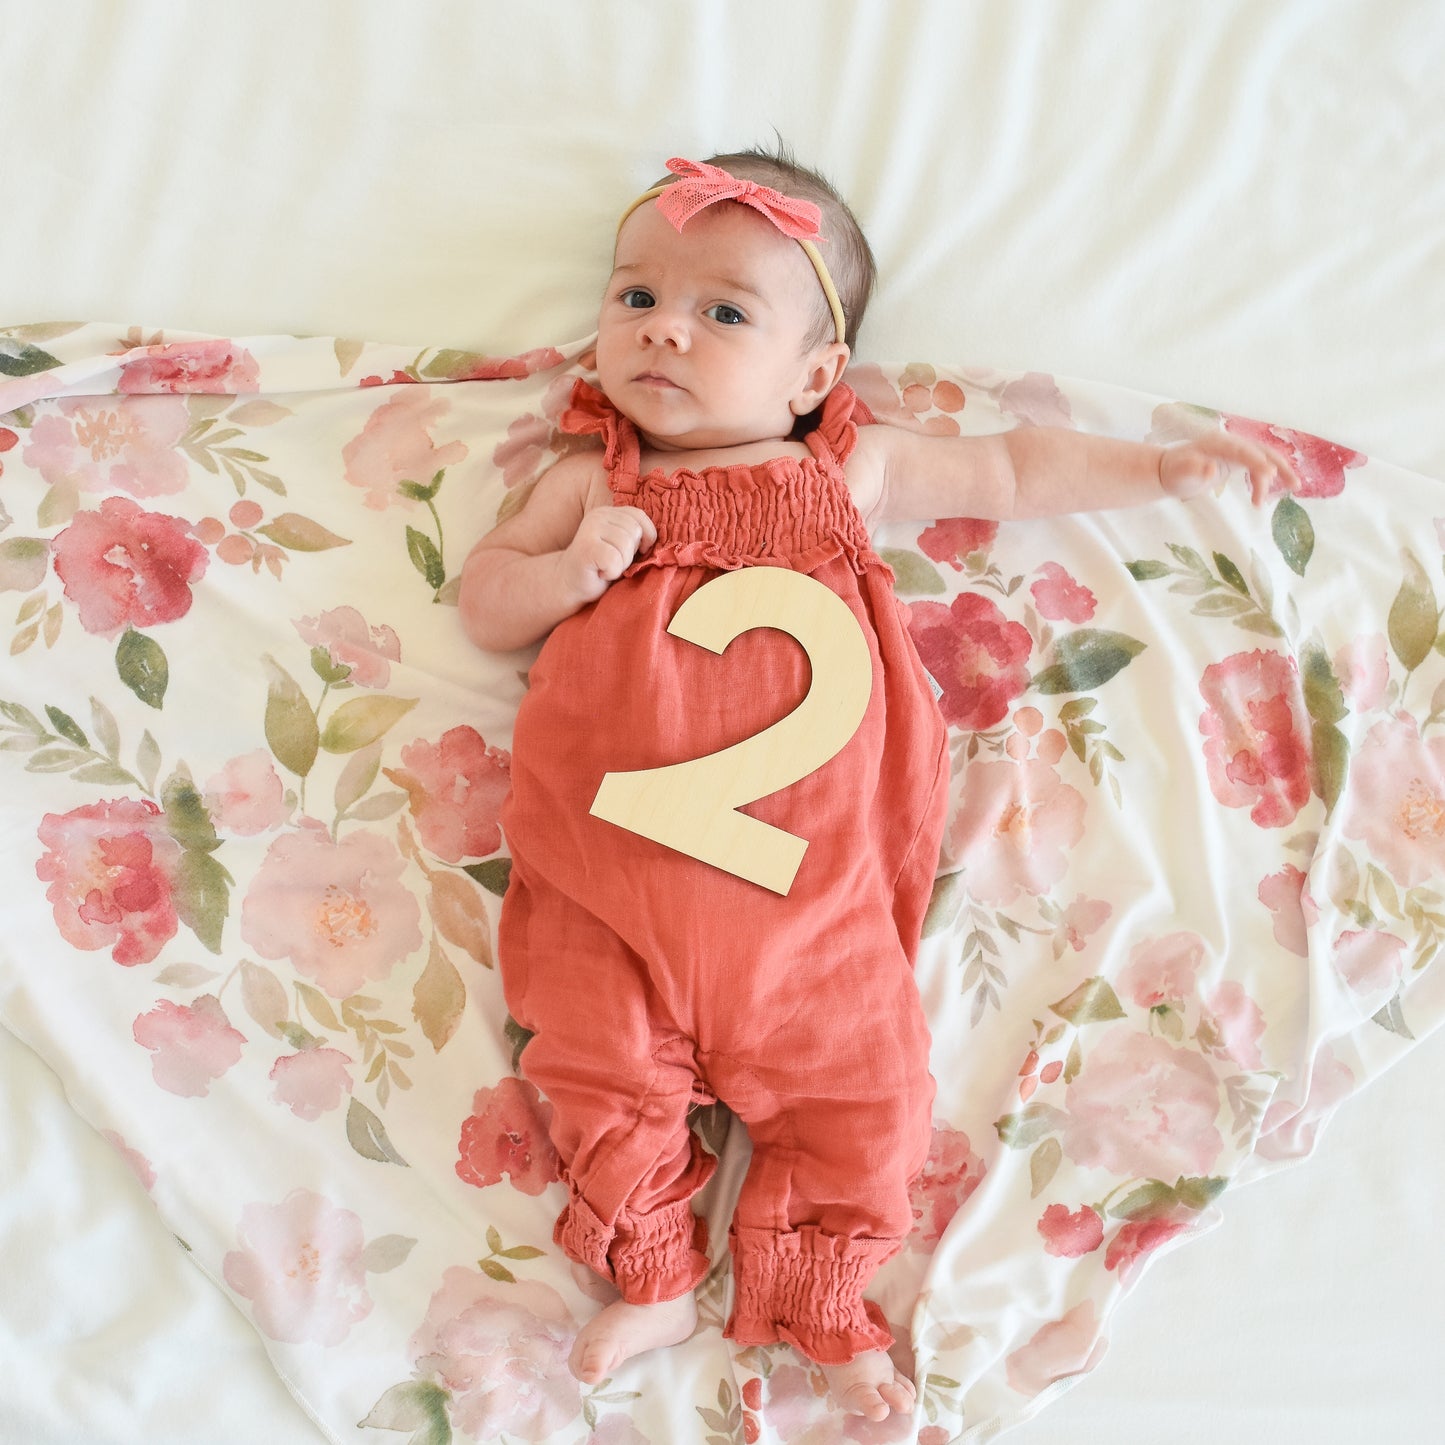 cute baby girl with number two sign because she is two months old with floral swaddle knit blanket